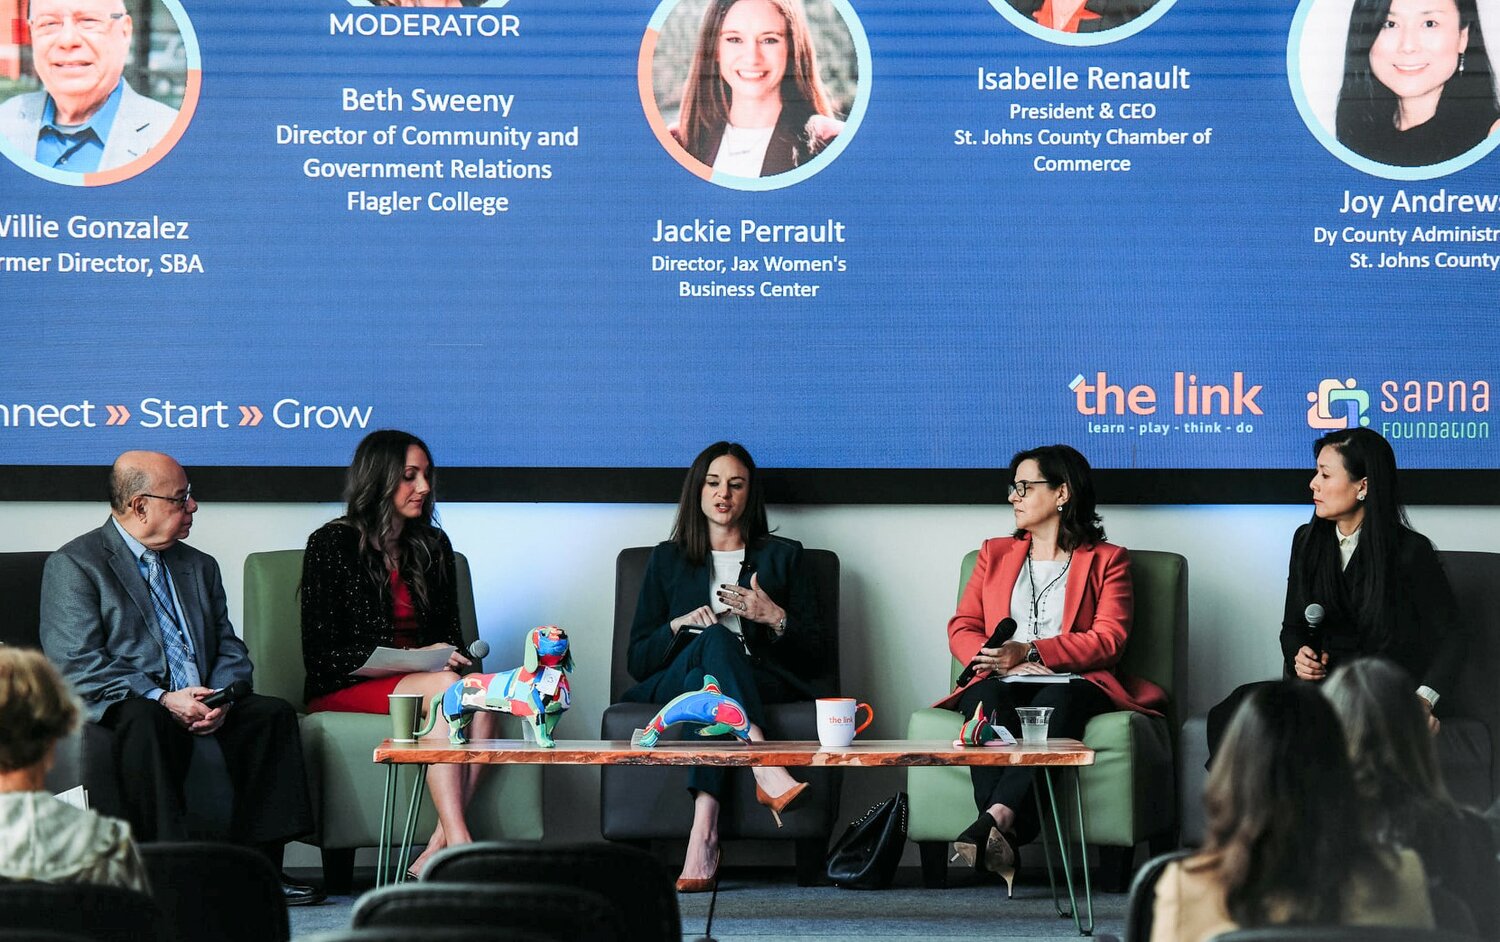 Women's Entrepreneurship Day: Willie Gonzales, Beth Sweeny, Jackie Perrault, Isabelle Renault and Joy Andrews discuss women's entrepreneurship at EnterCircle Summit 2021.